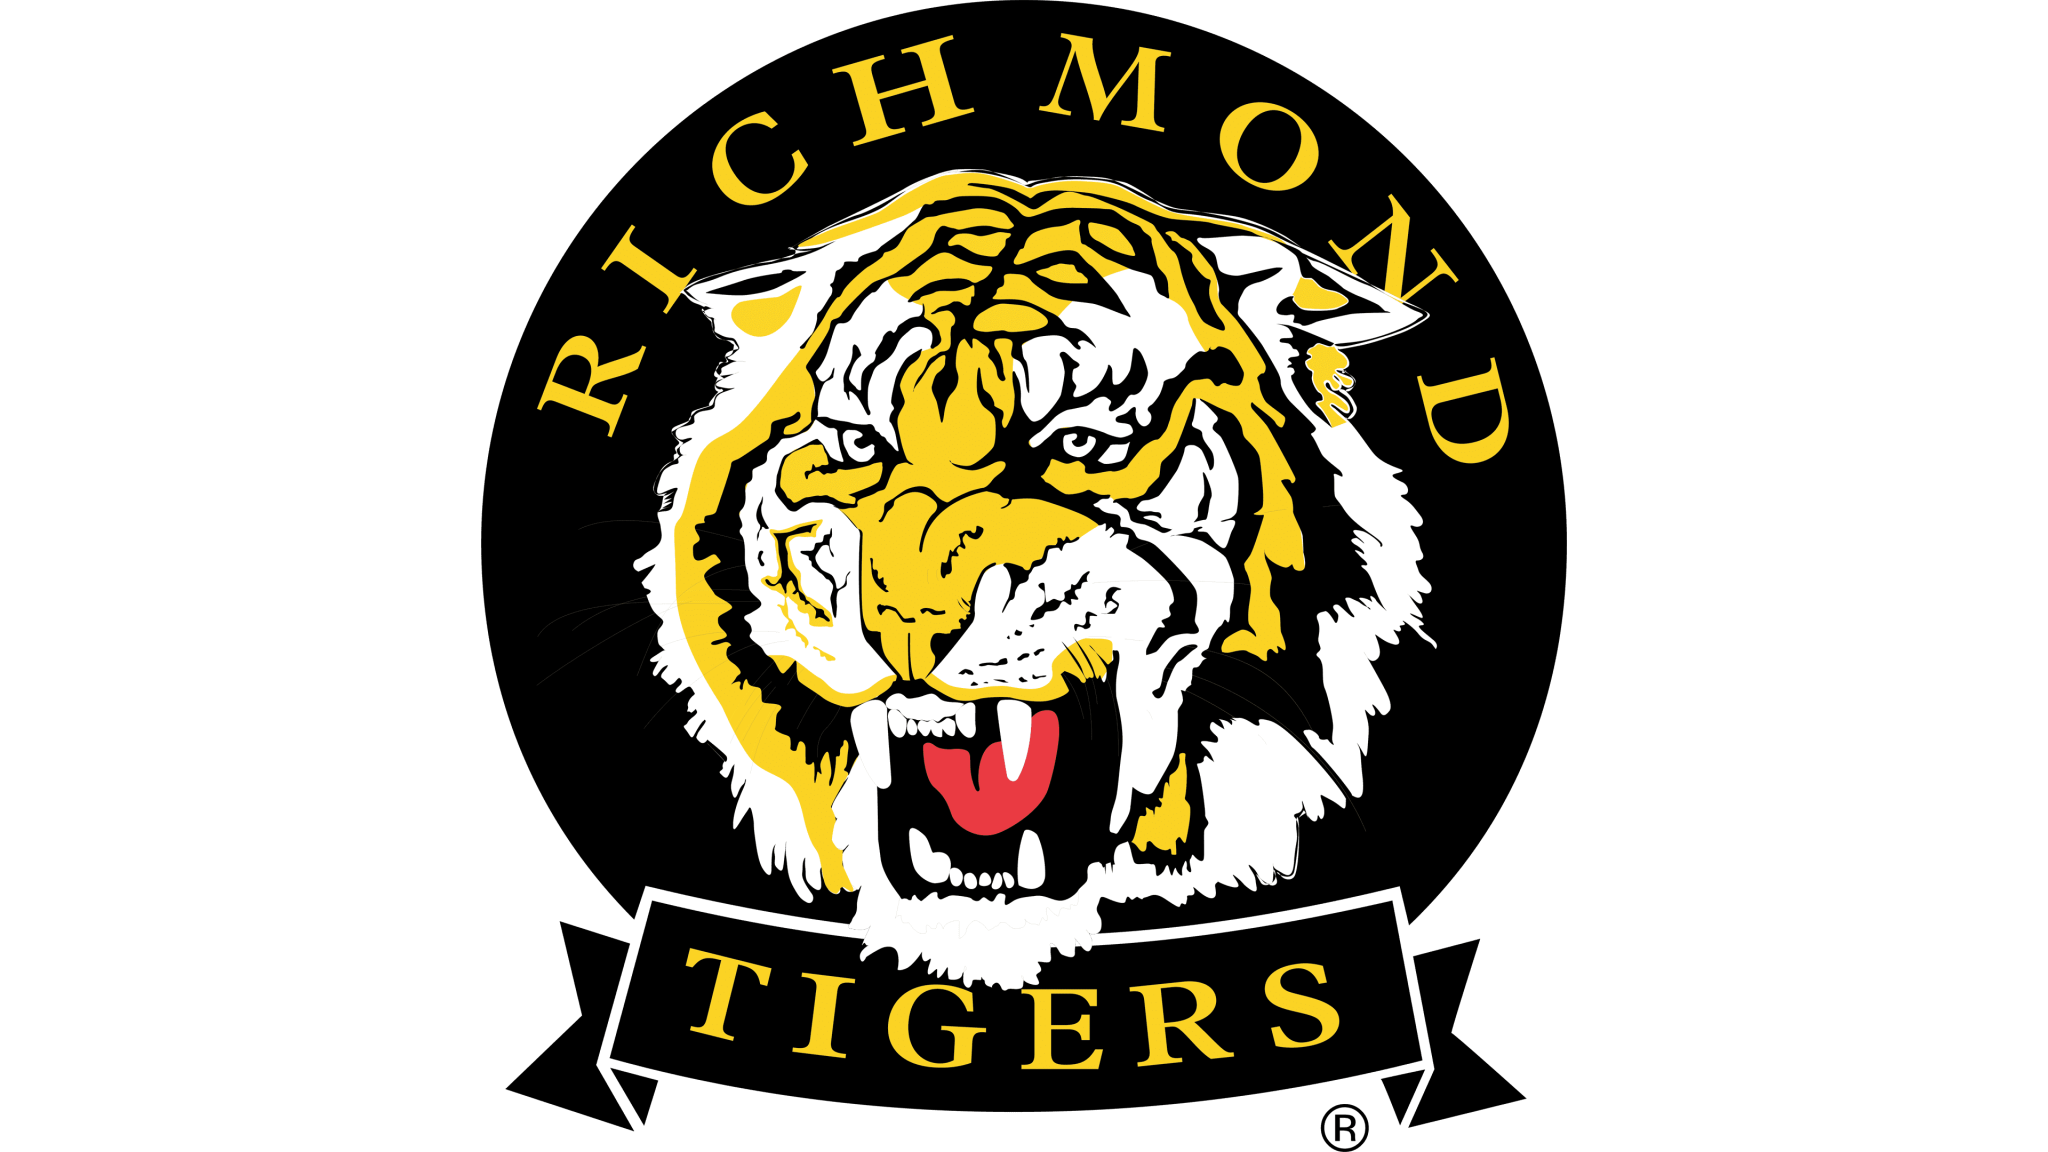 Richmond logo png - Download Free Png Images